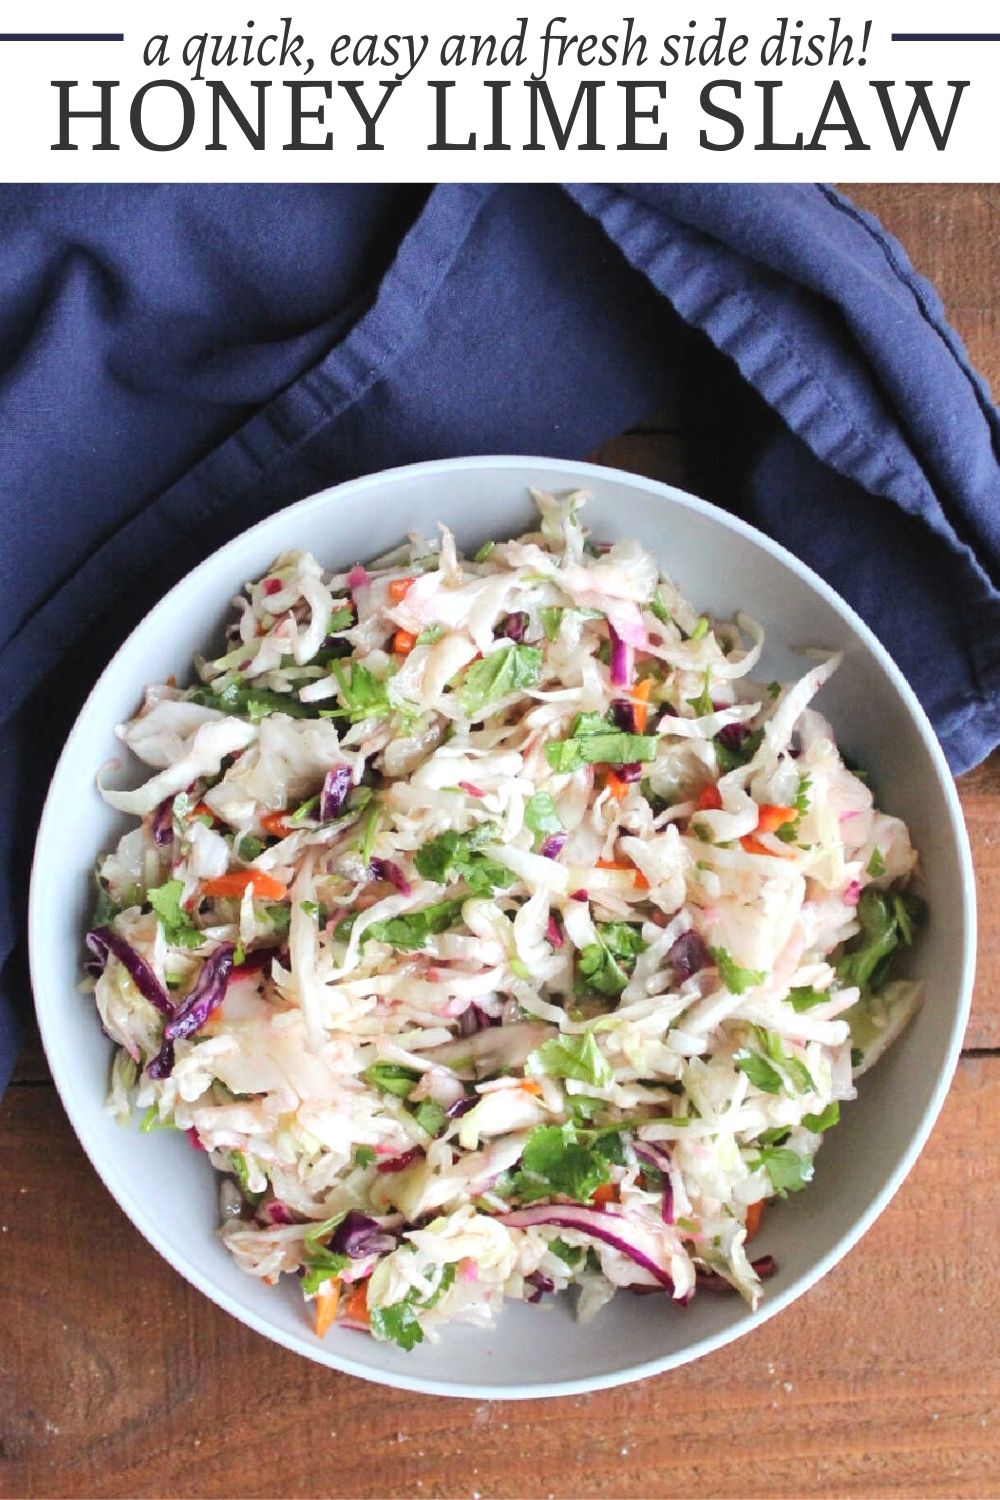 Turn up your coleslaw with Sriracha and cilantro. This honey lime slaw is a perfect addition to tacos, would be great on pulled pork, or serve it as a side dish to your favorite grilled meats.